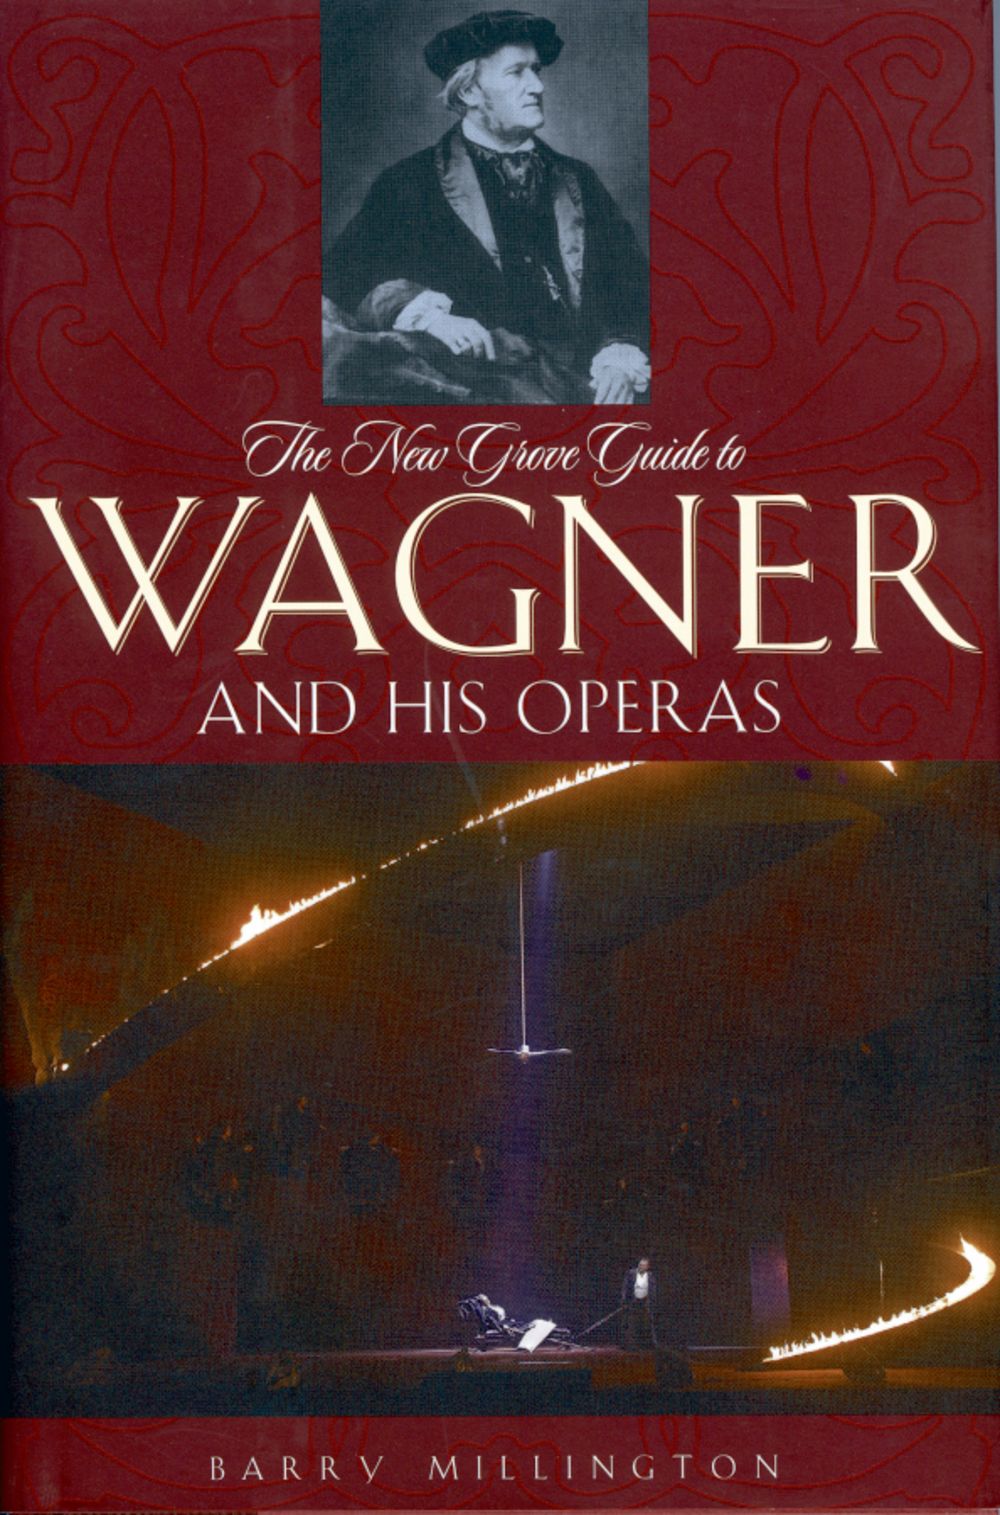 New Grove Guide To Wagner And His Operas Pb Sheet Music Songbook